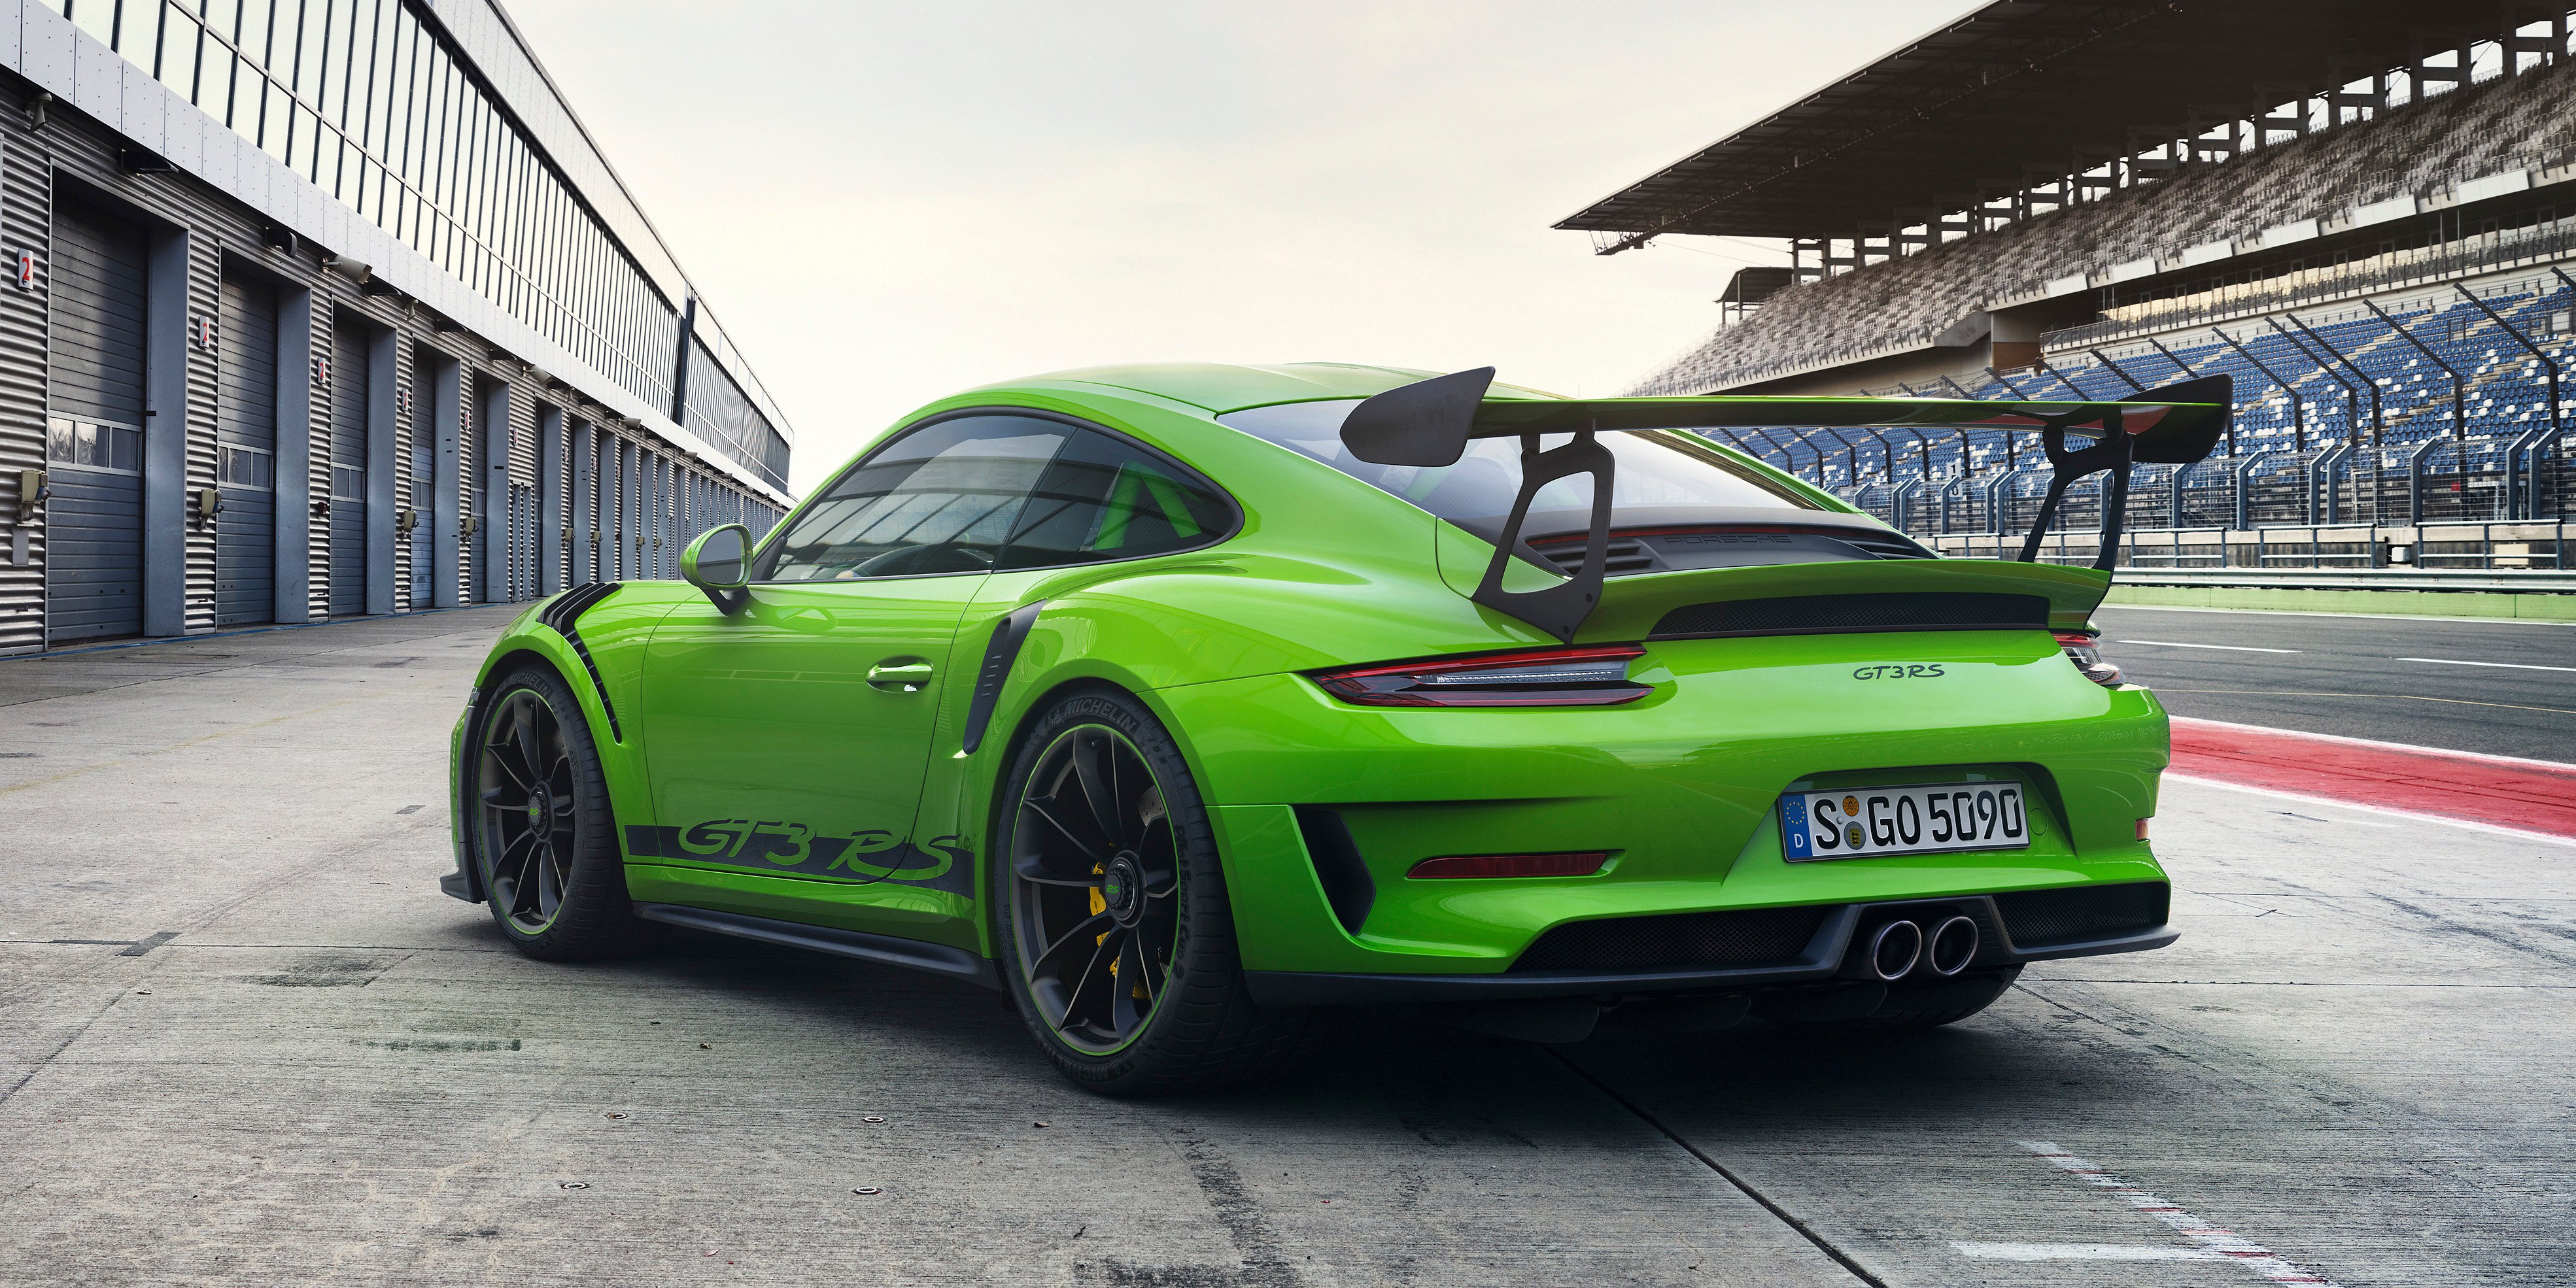 2018 Porsche 911 GT3 RS unveiled, priced from 416,500